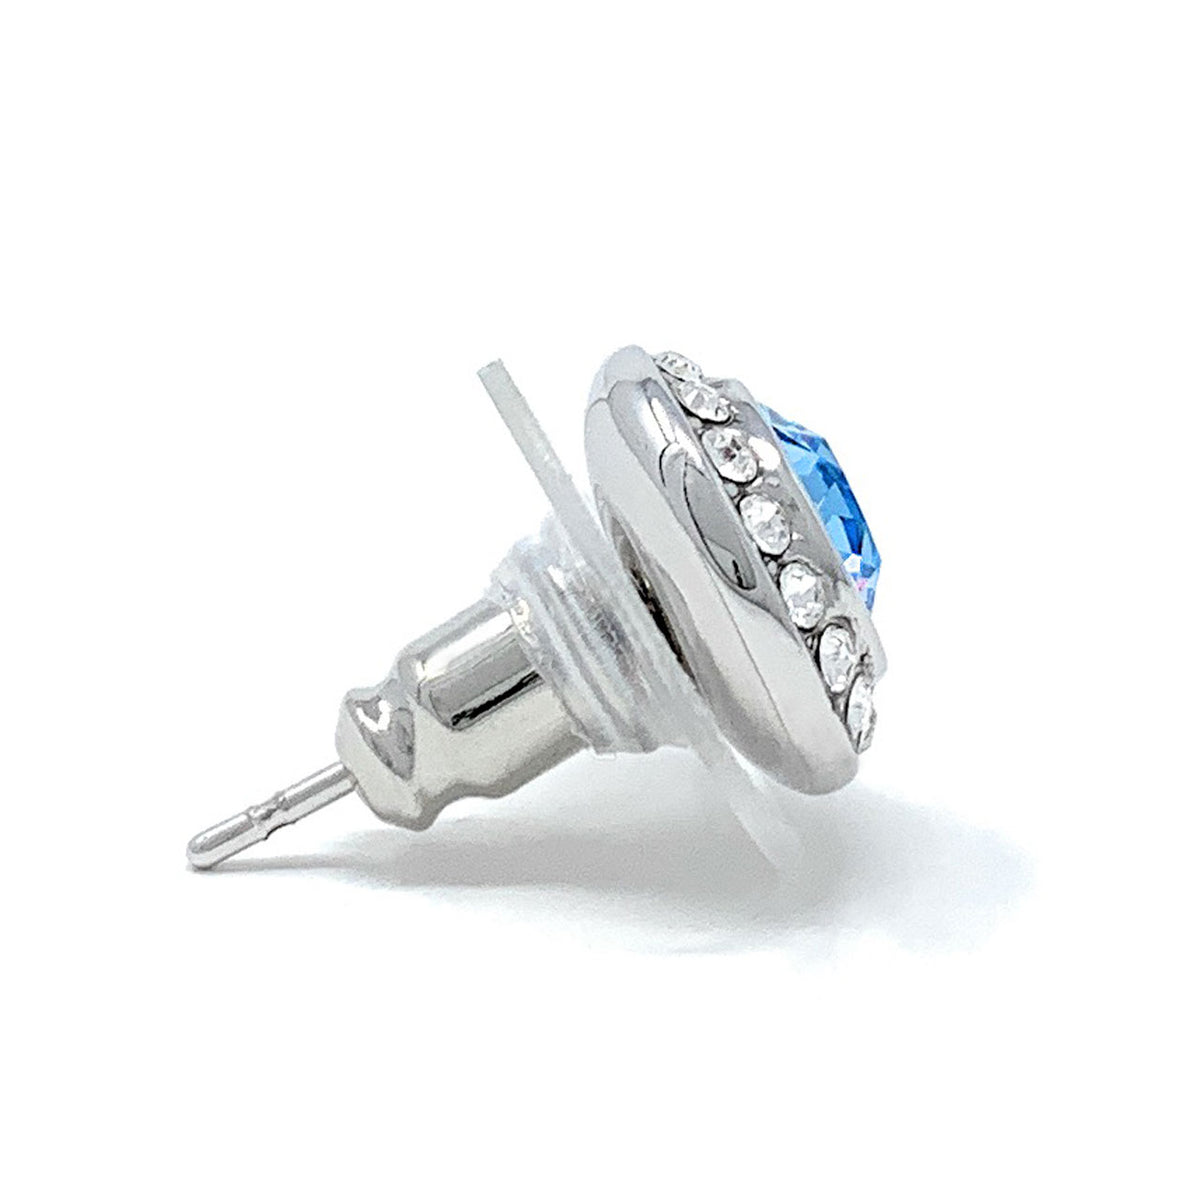 Halo Pave Stud Earrings with Blue Aquamarine Round Crystals from Swarovski Silver Toned Rhodium Plated - Ed Heart